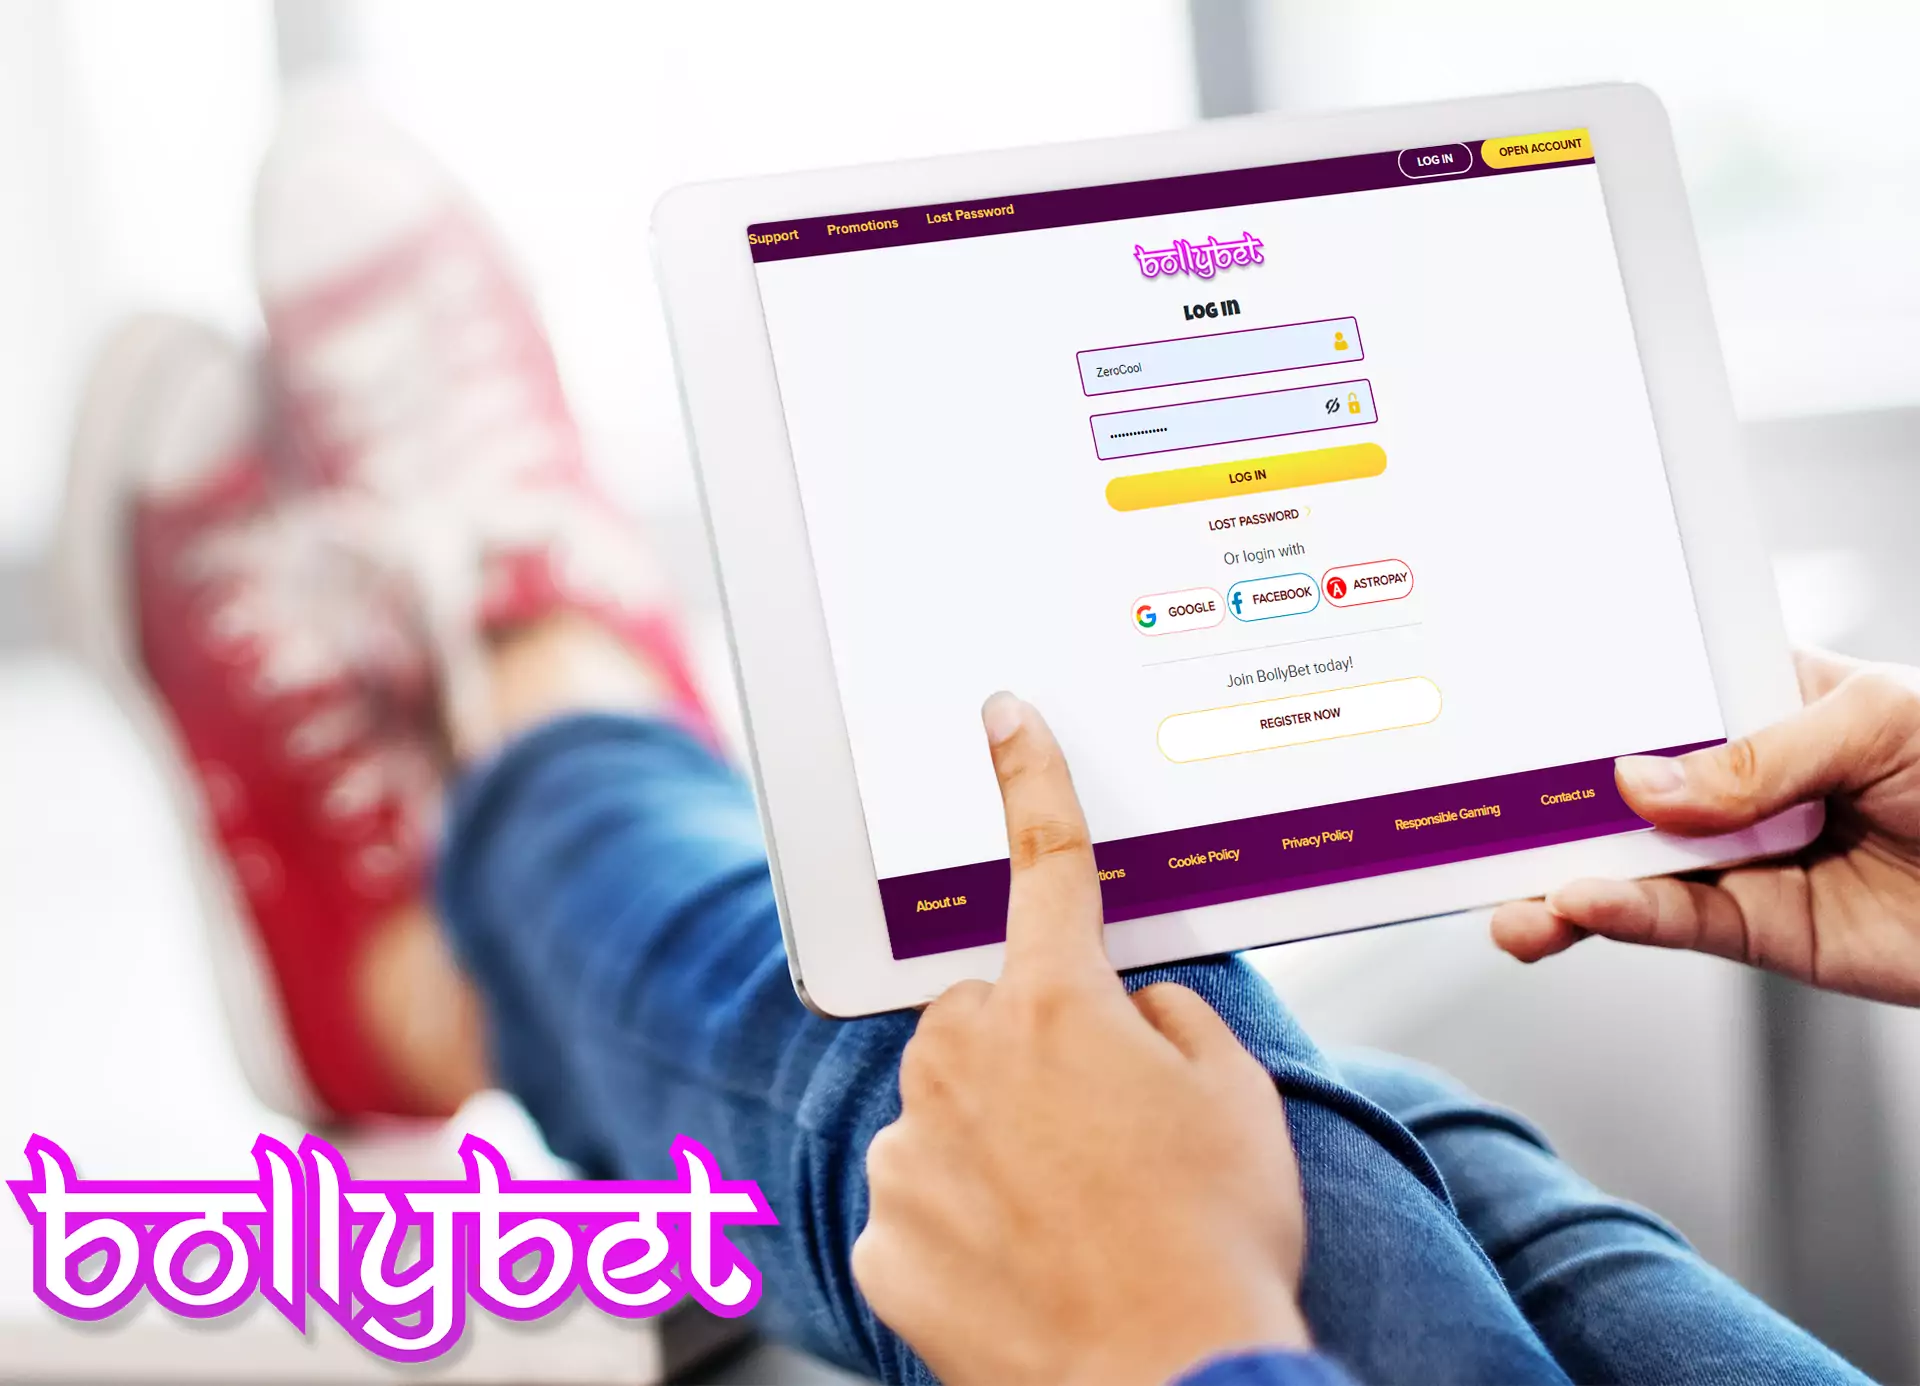 Log in to Bollybet using your email and password.